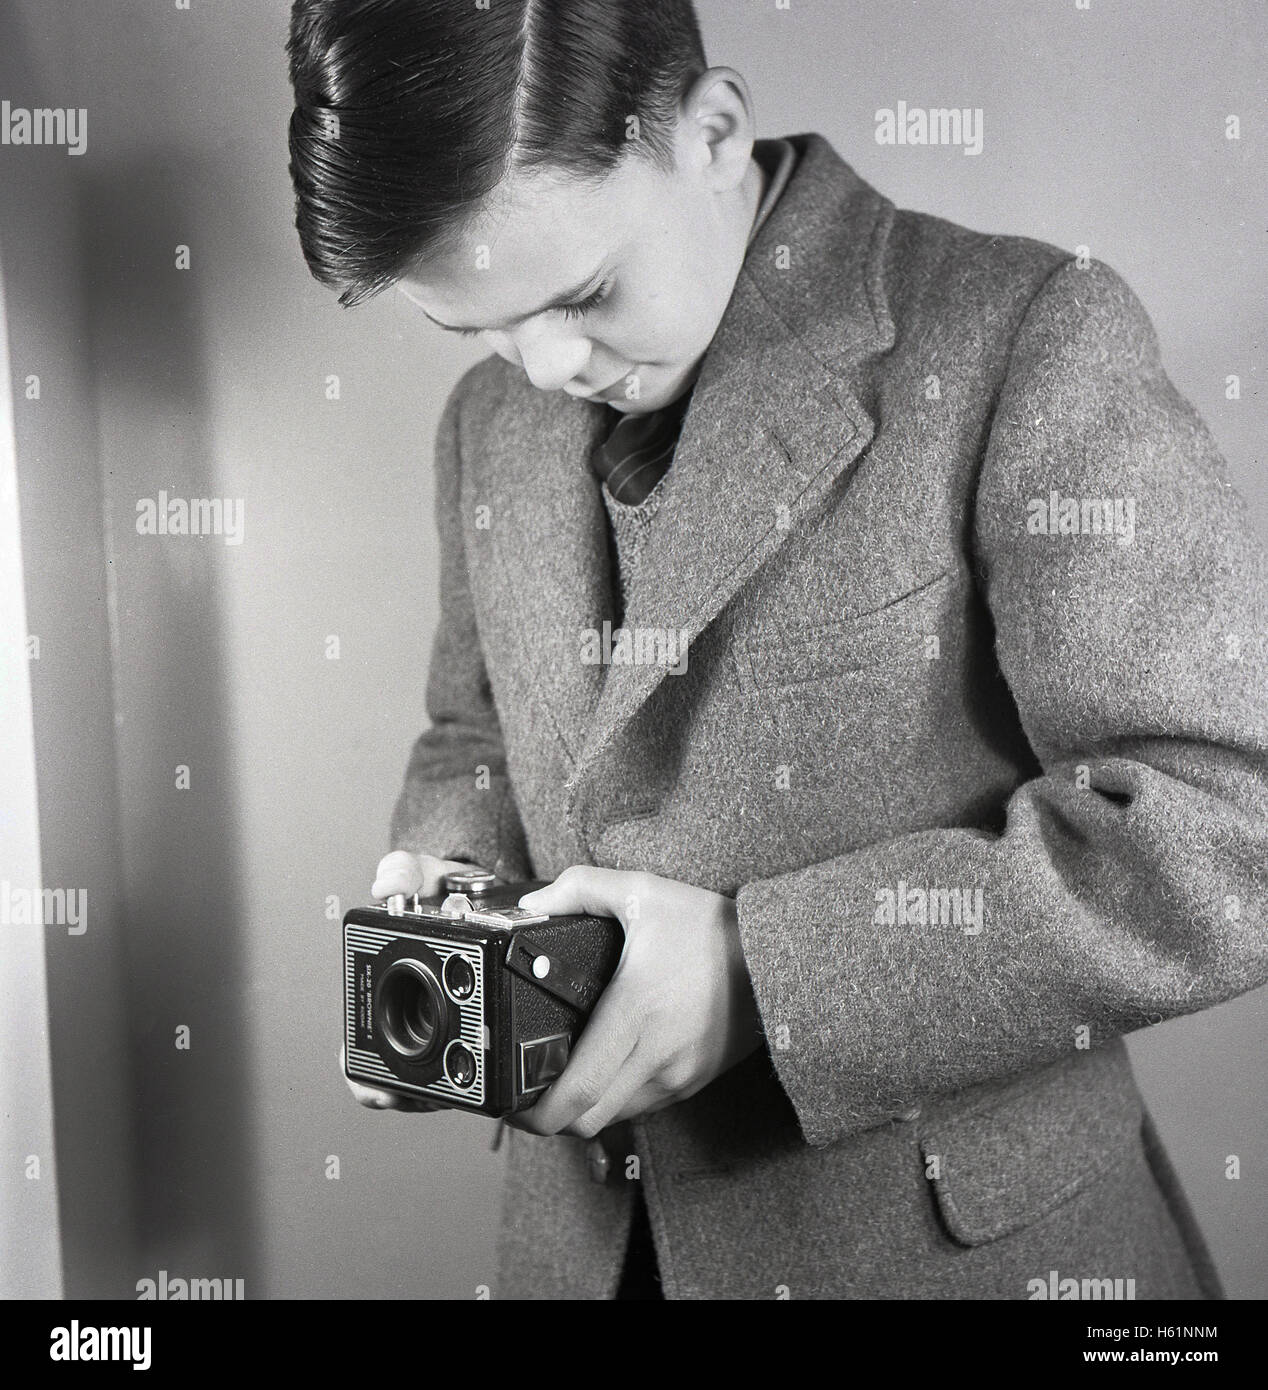 Early 1950s, historical, school boy standing taking a photograph at waist-level using a British made Six-20 'Brownie' E twin-lens reflex box film camera with two viewfinders. Stock Photo